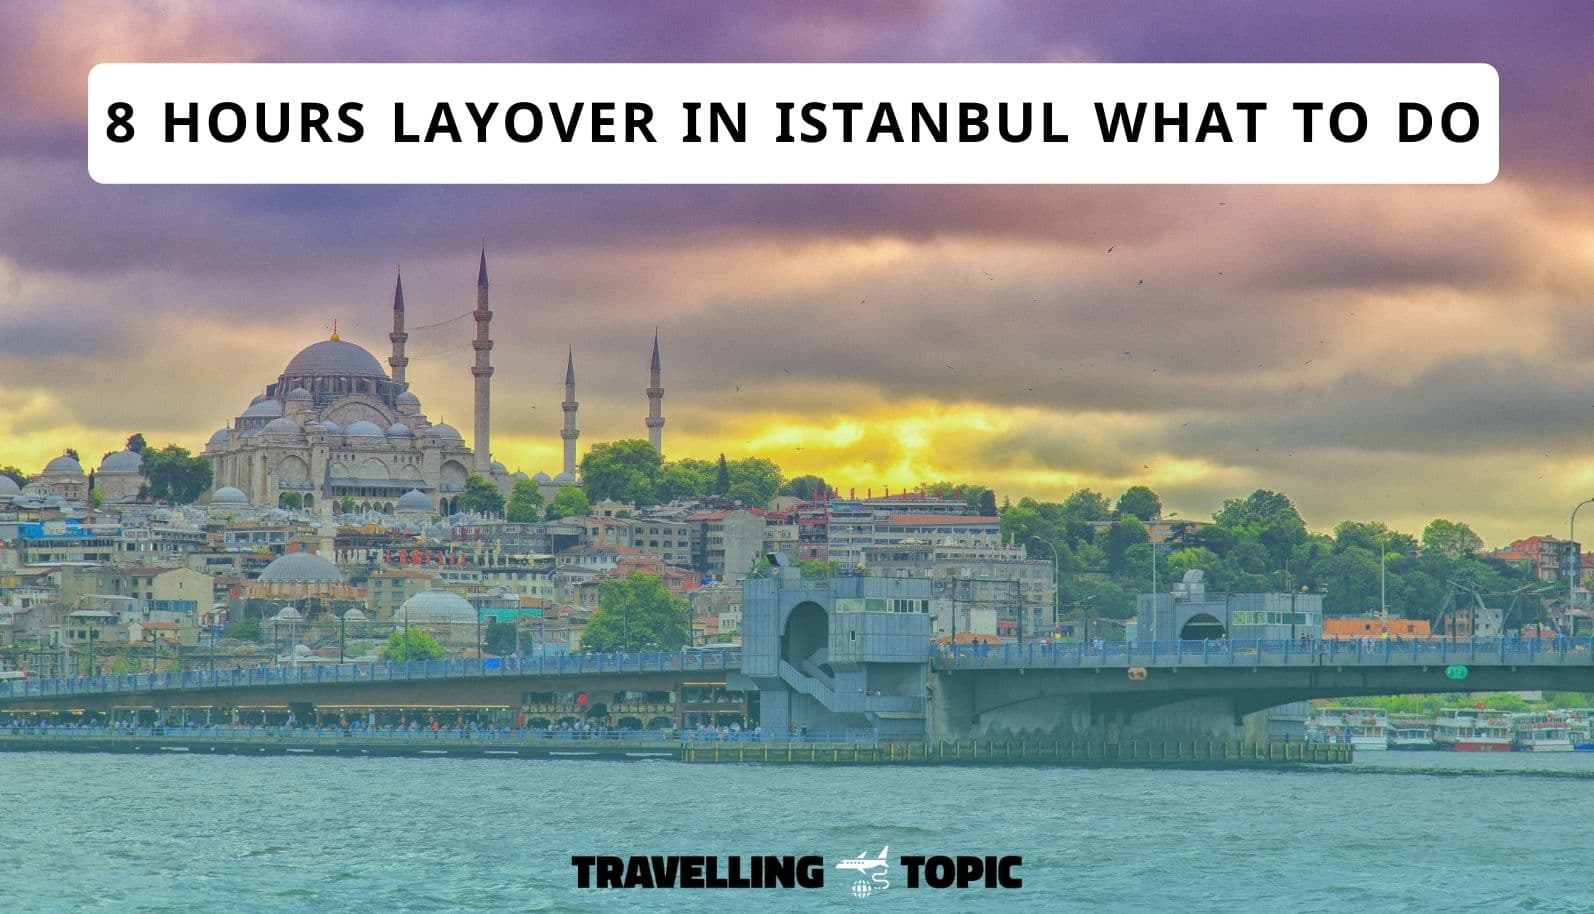 What to do in Istanbul Airport for 8 hours layover?